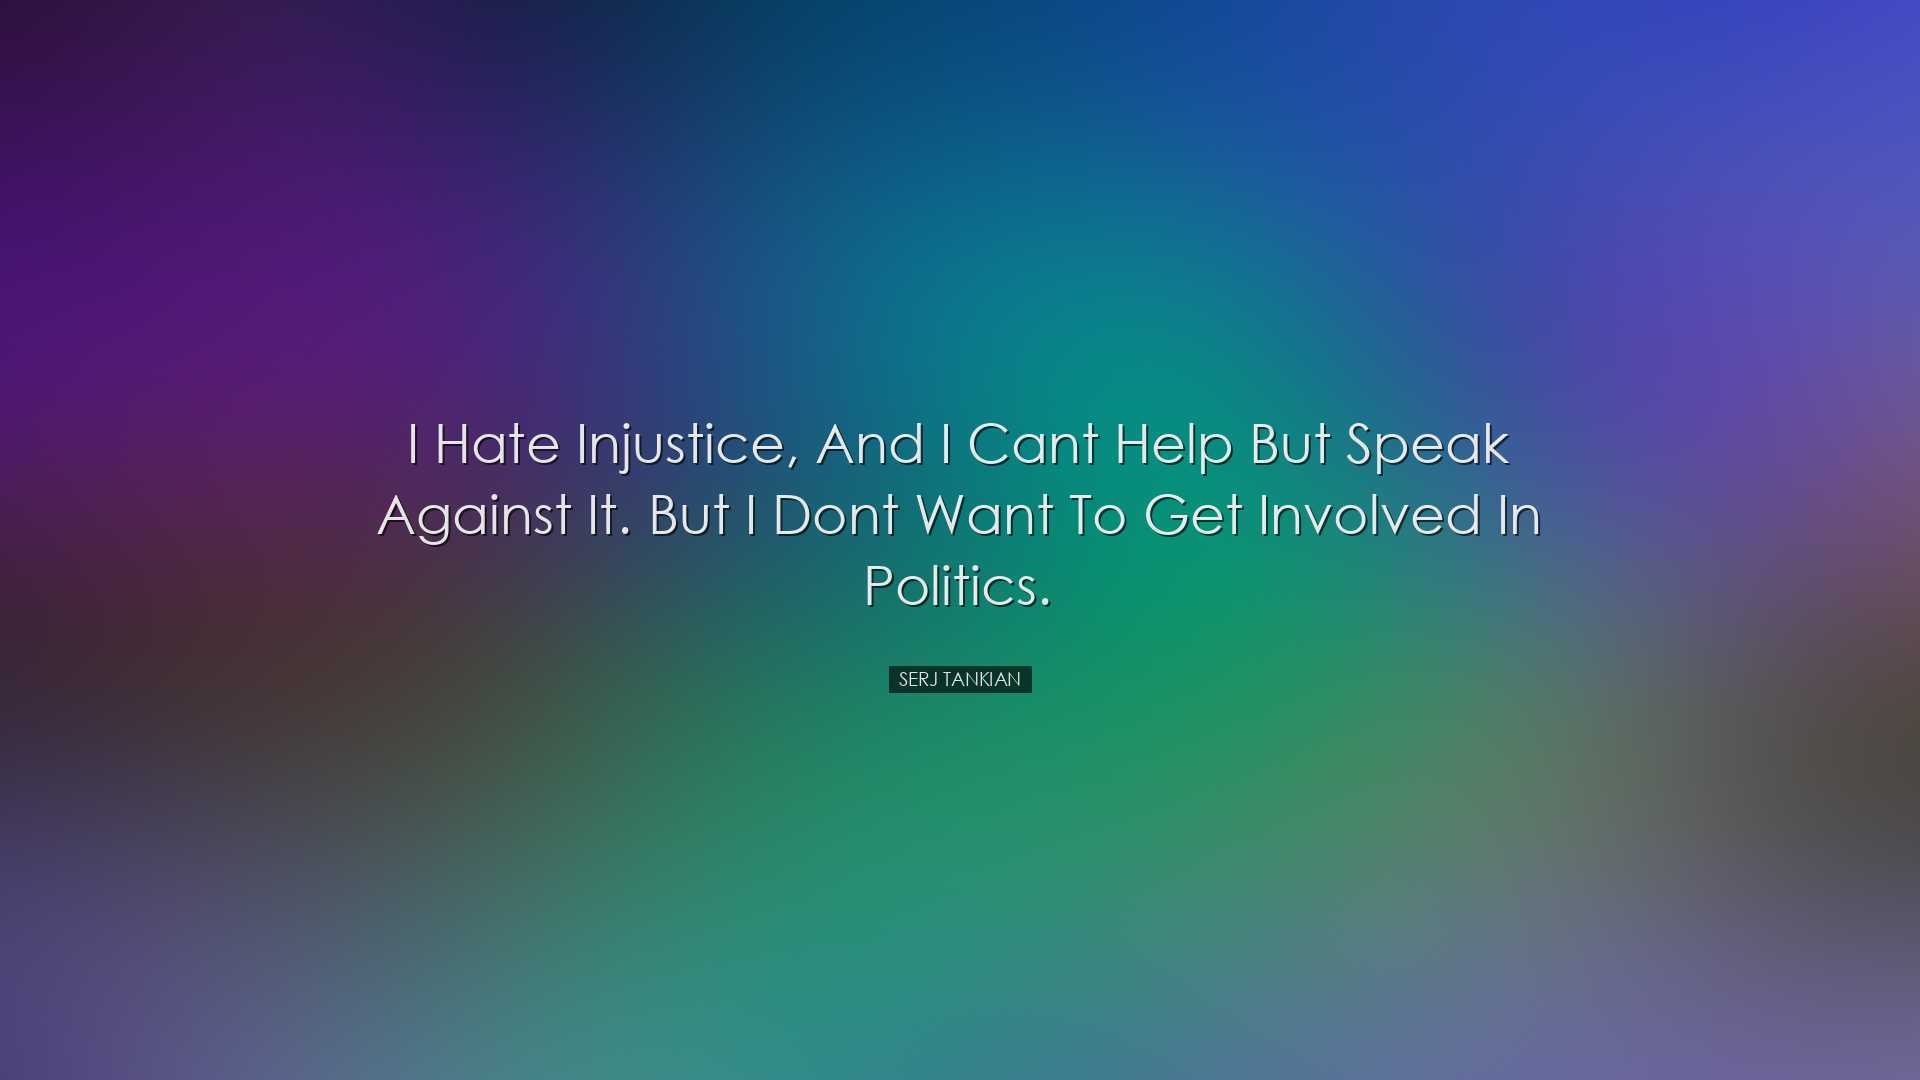 I hate injustice, and I cant help but speak against it. But I dont